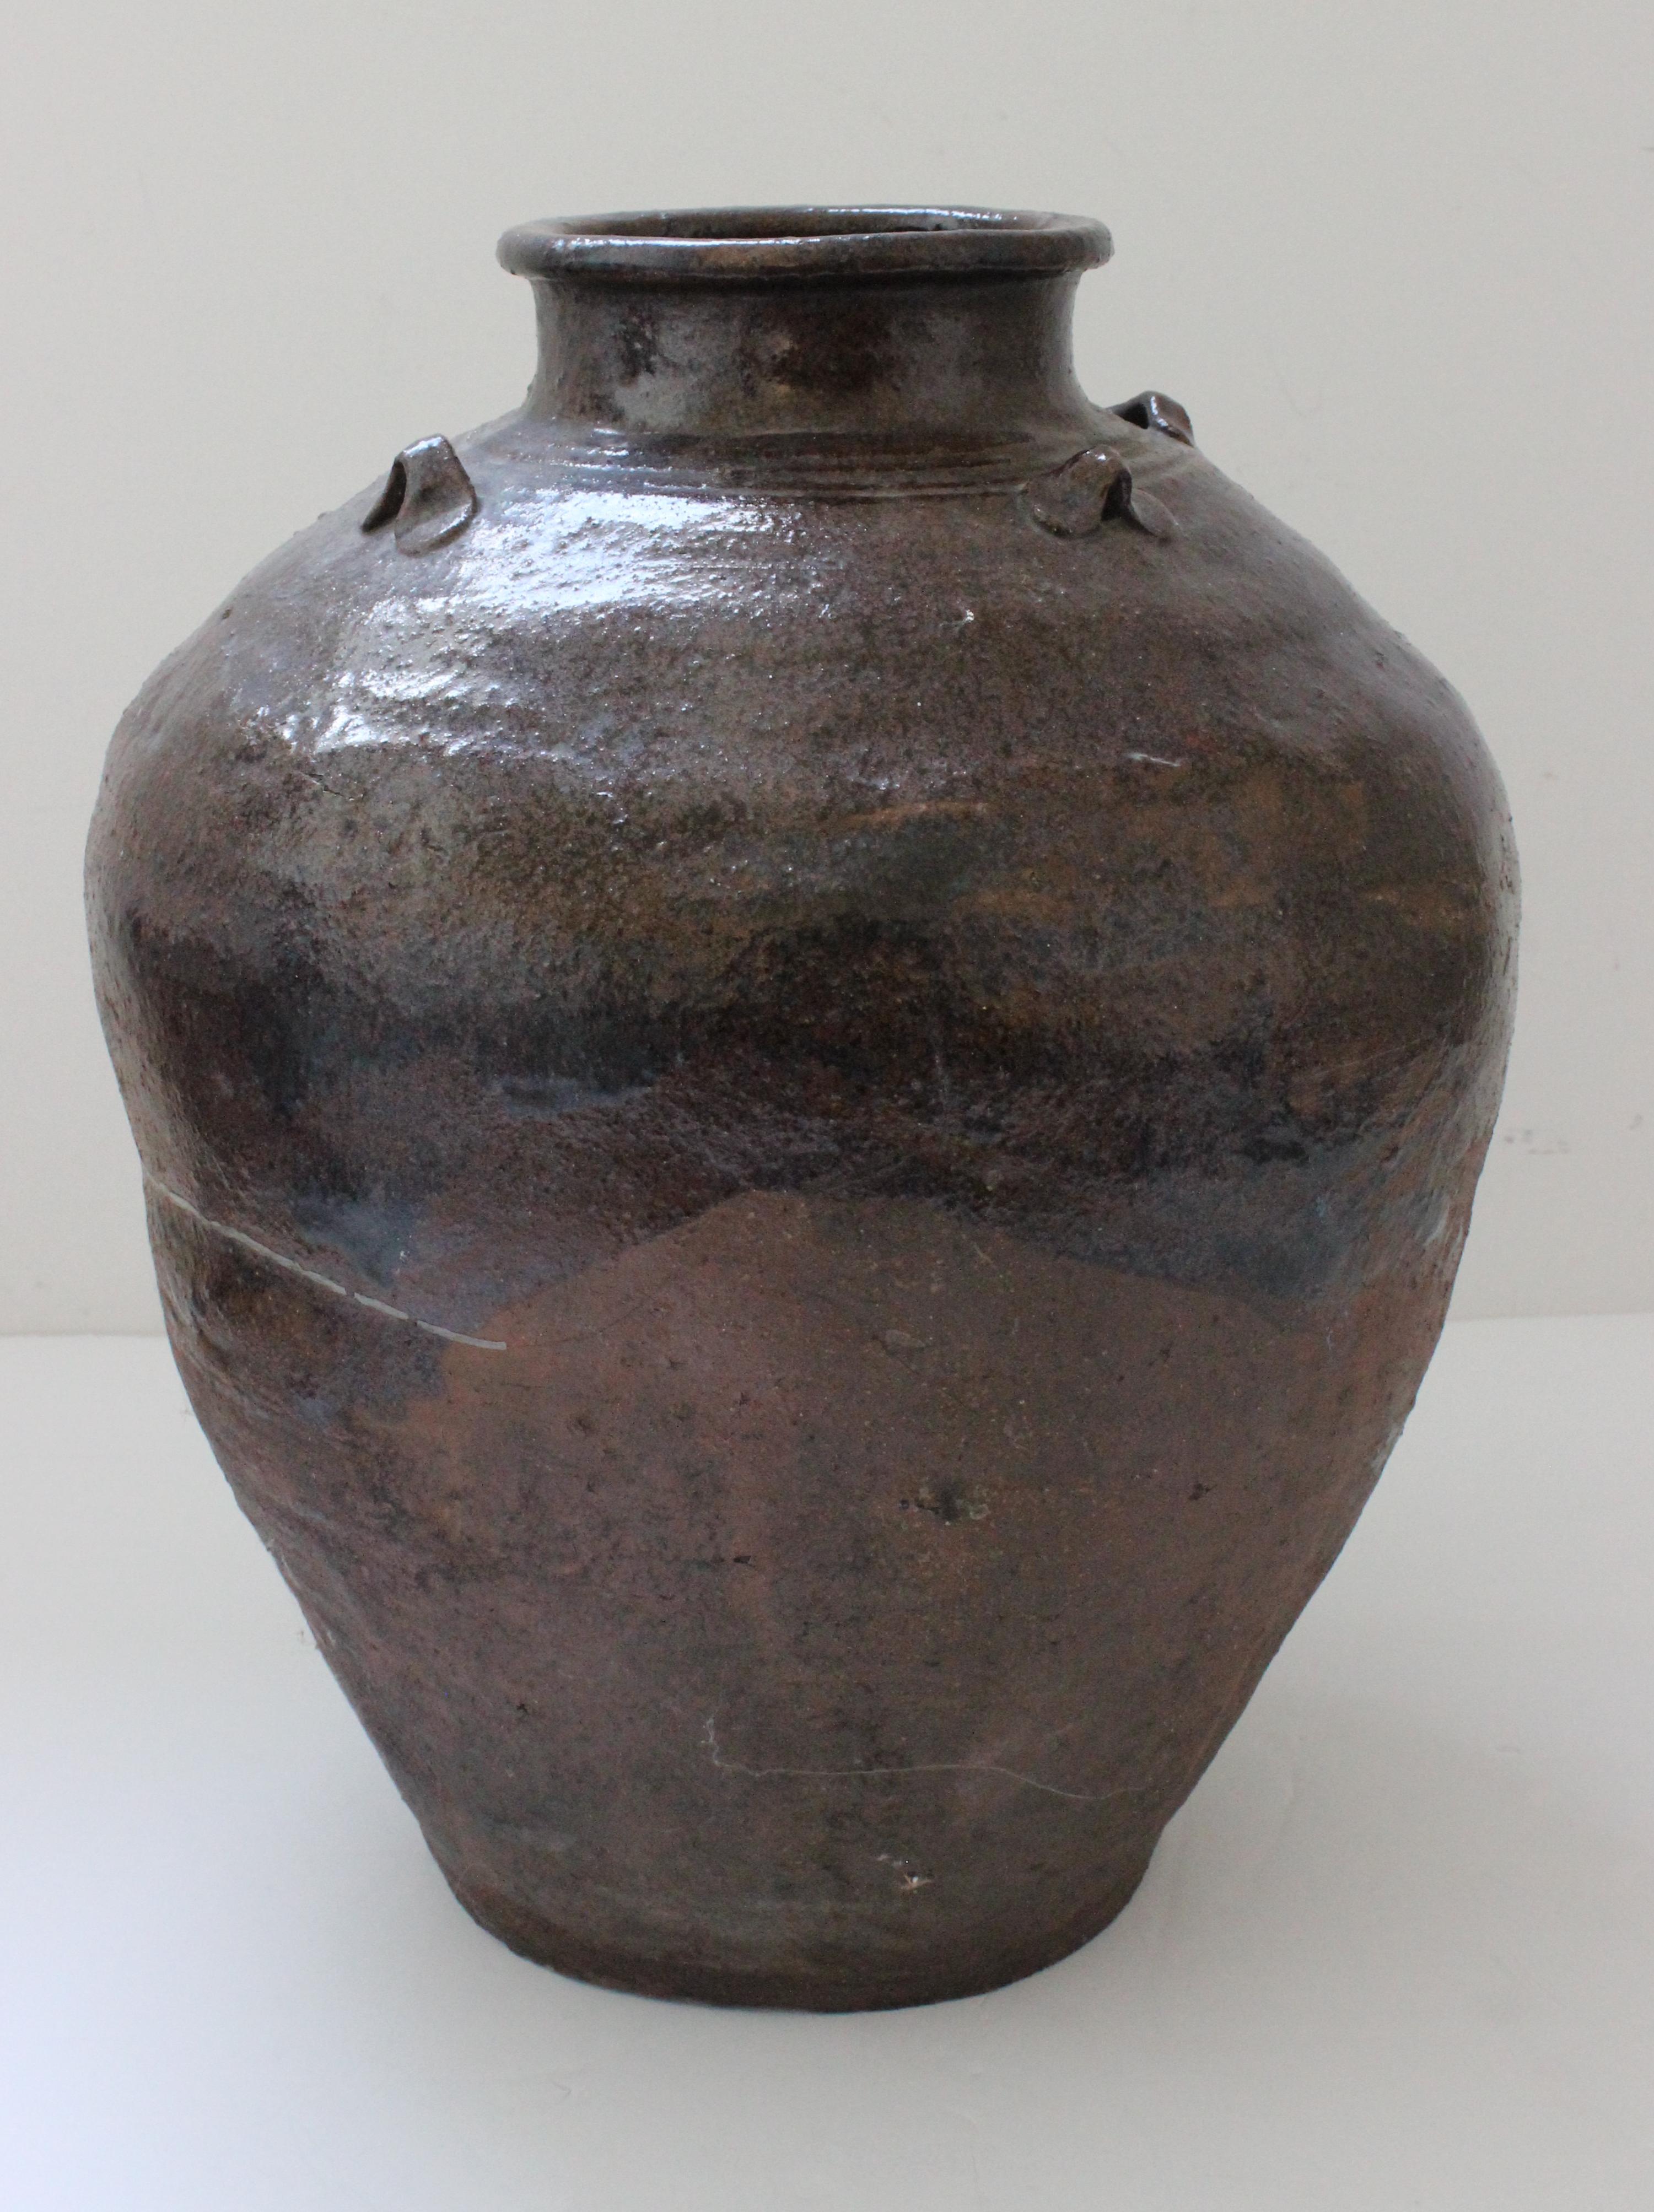 This Japanese, Seto stoneware tea jar dates to the 17th century and was acquired from an estate in Portland, OR. The dark brown iron glaze was known as tenmoku wares. 

Note: We are describing the jar as such based on what the previous owner has